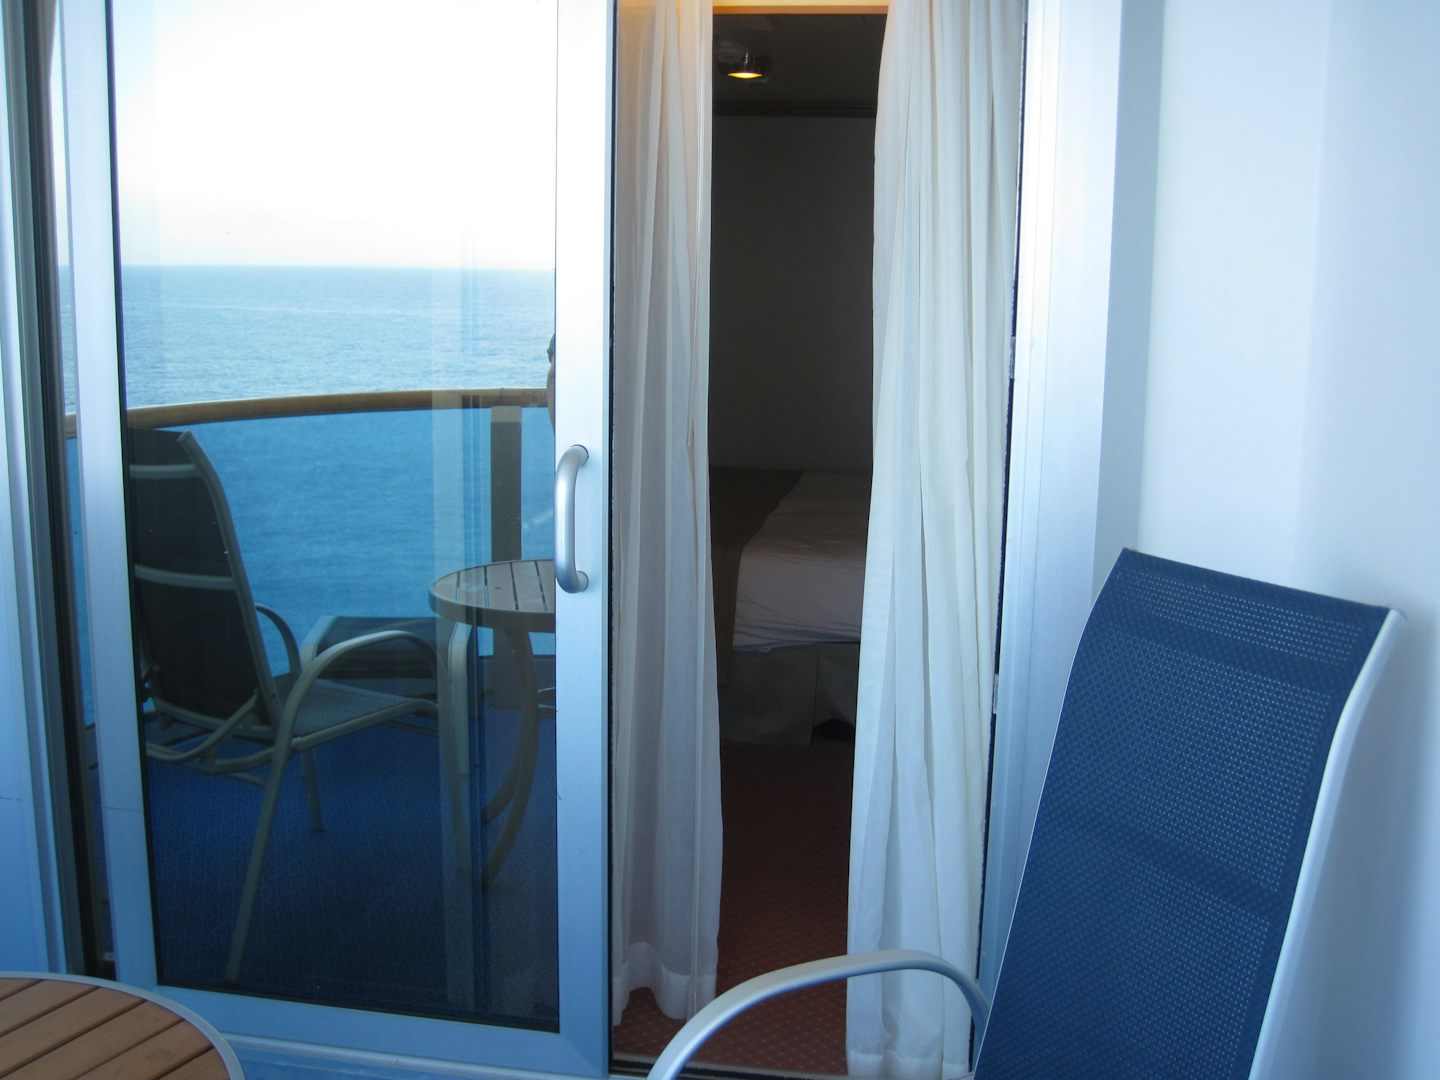 Deck looking into the room - C752. Great aft balcony cabin-see reflection of the ocean!